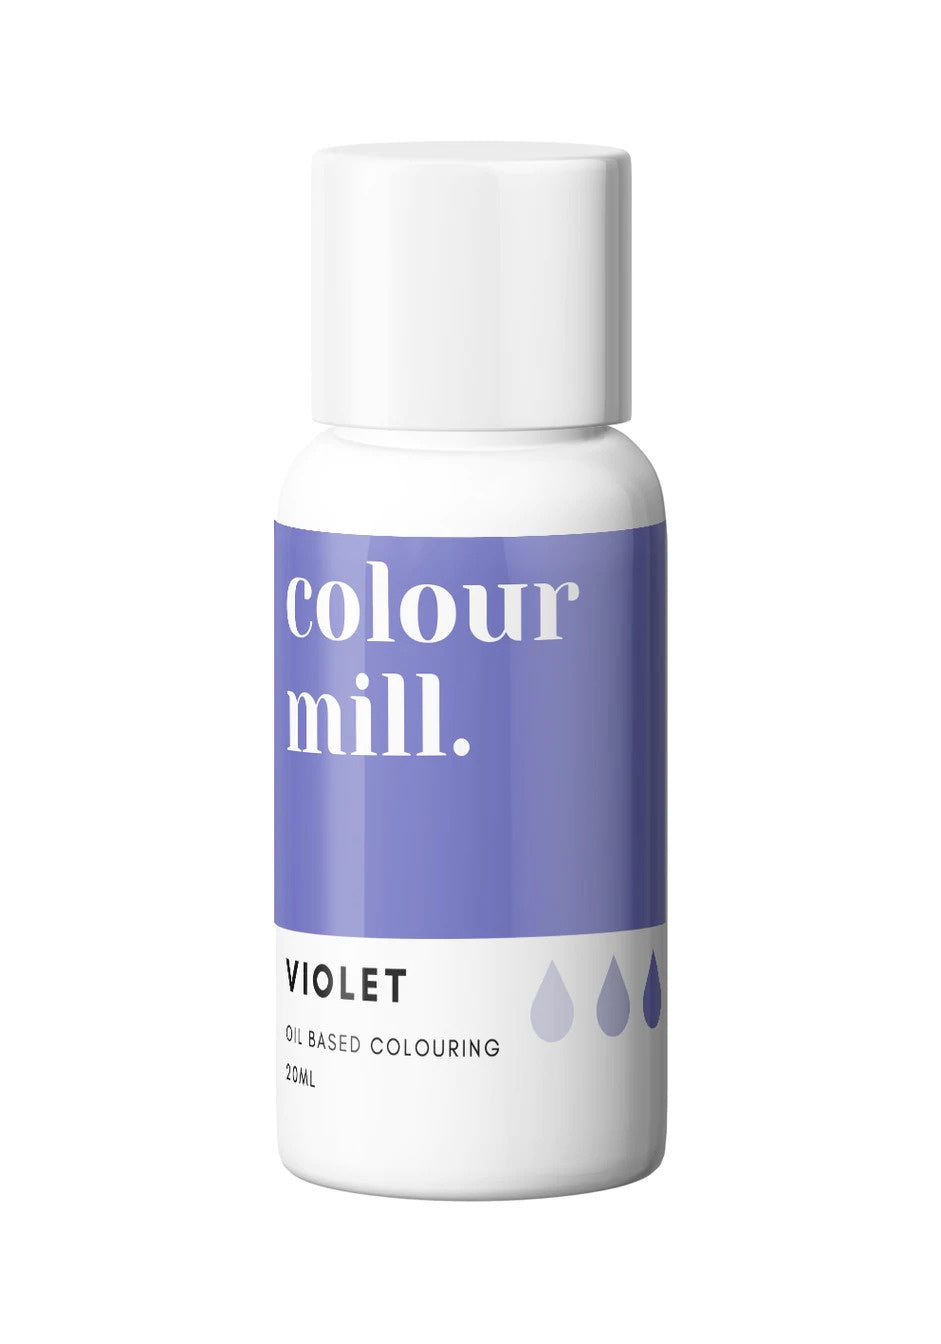 Violet, 20ml, Colour Mill Oil Based Colouring